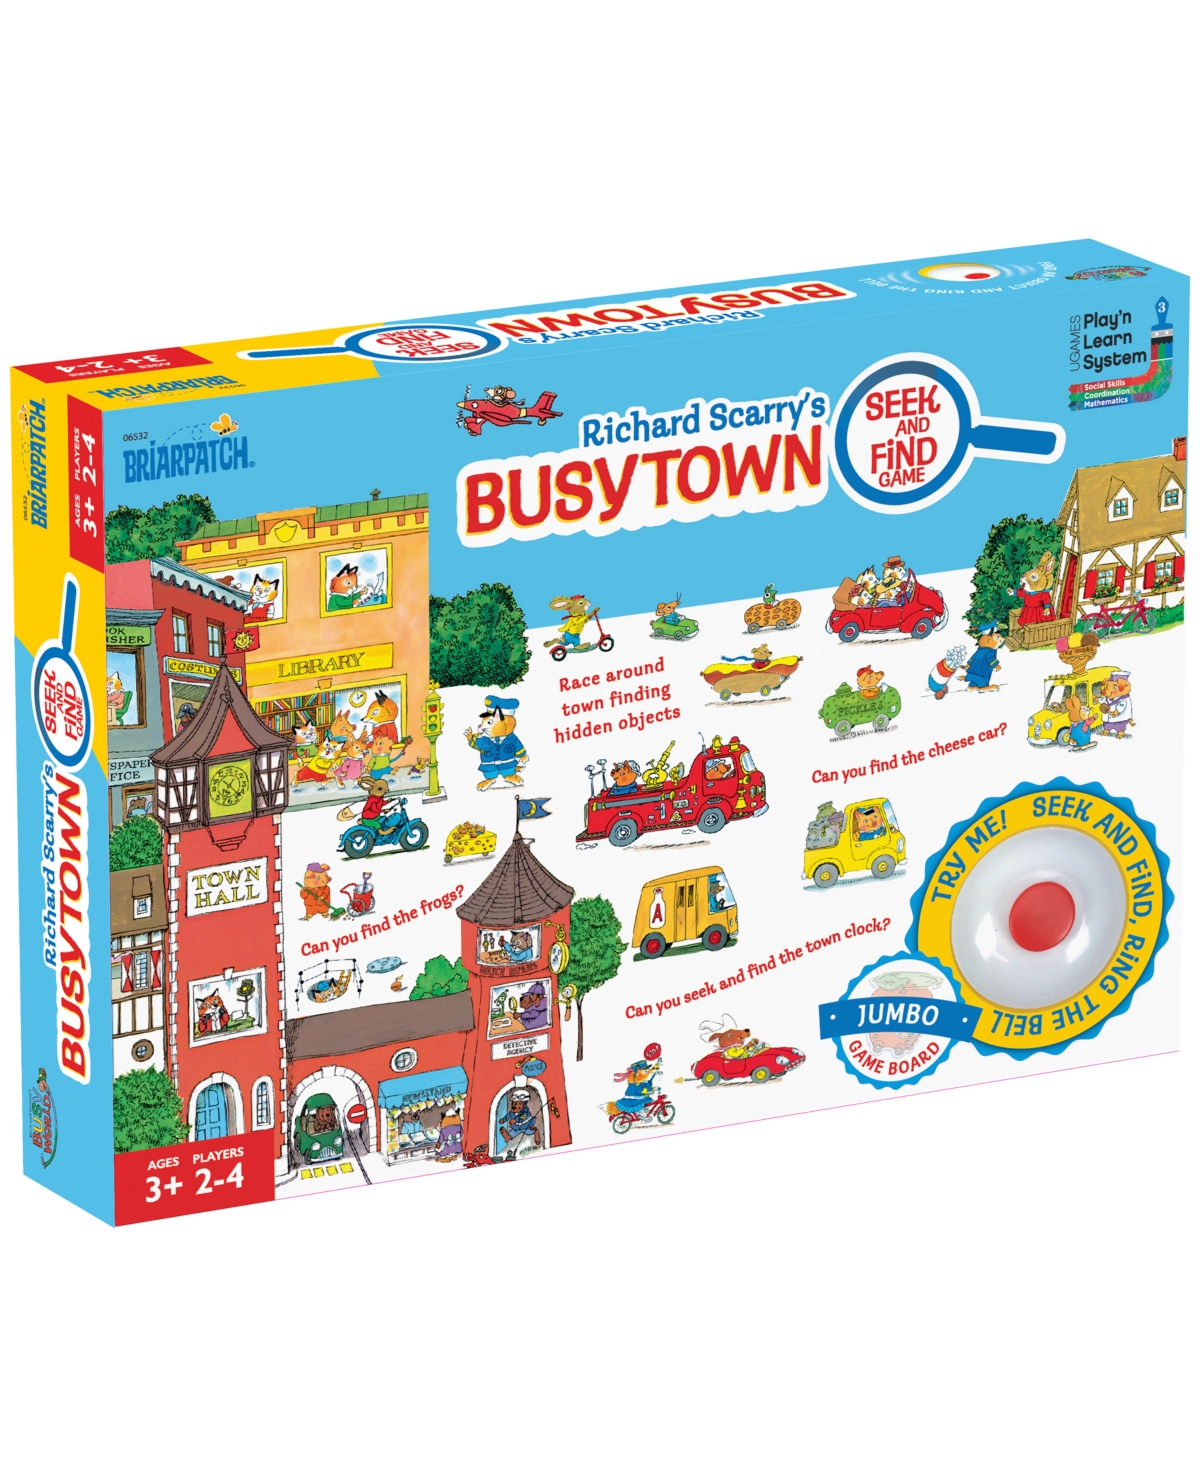 Areyougame Babies' Briarpatch Richard Scarry's Busytown Seek And Find Game In No Color